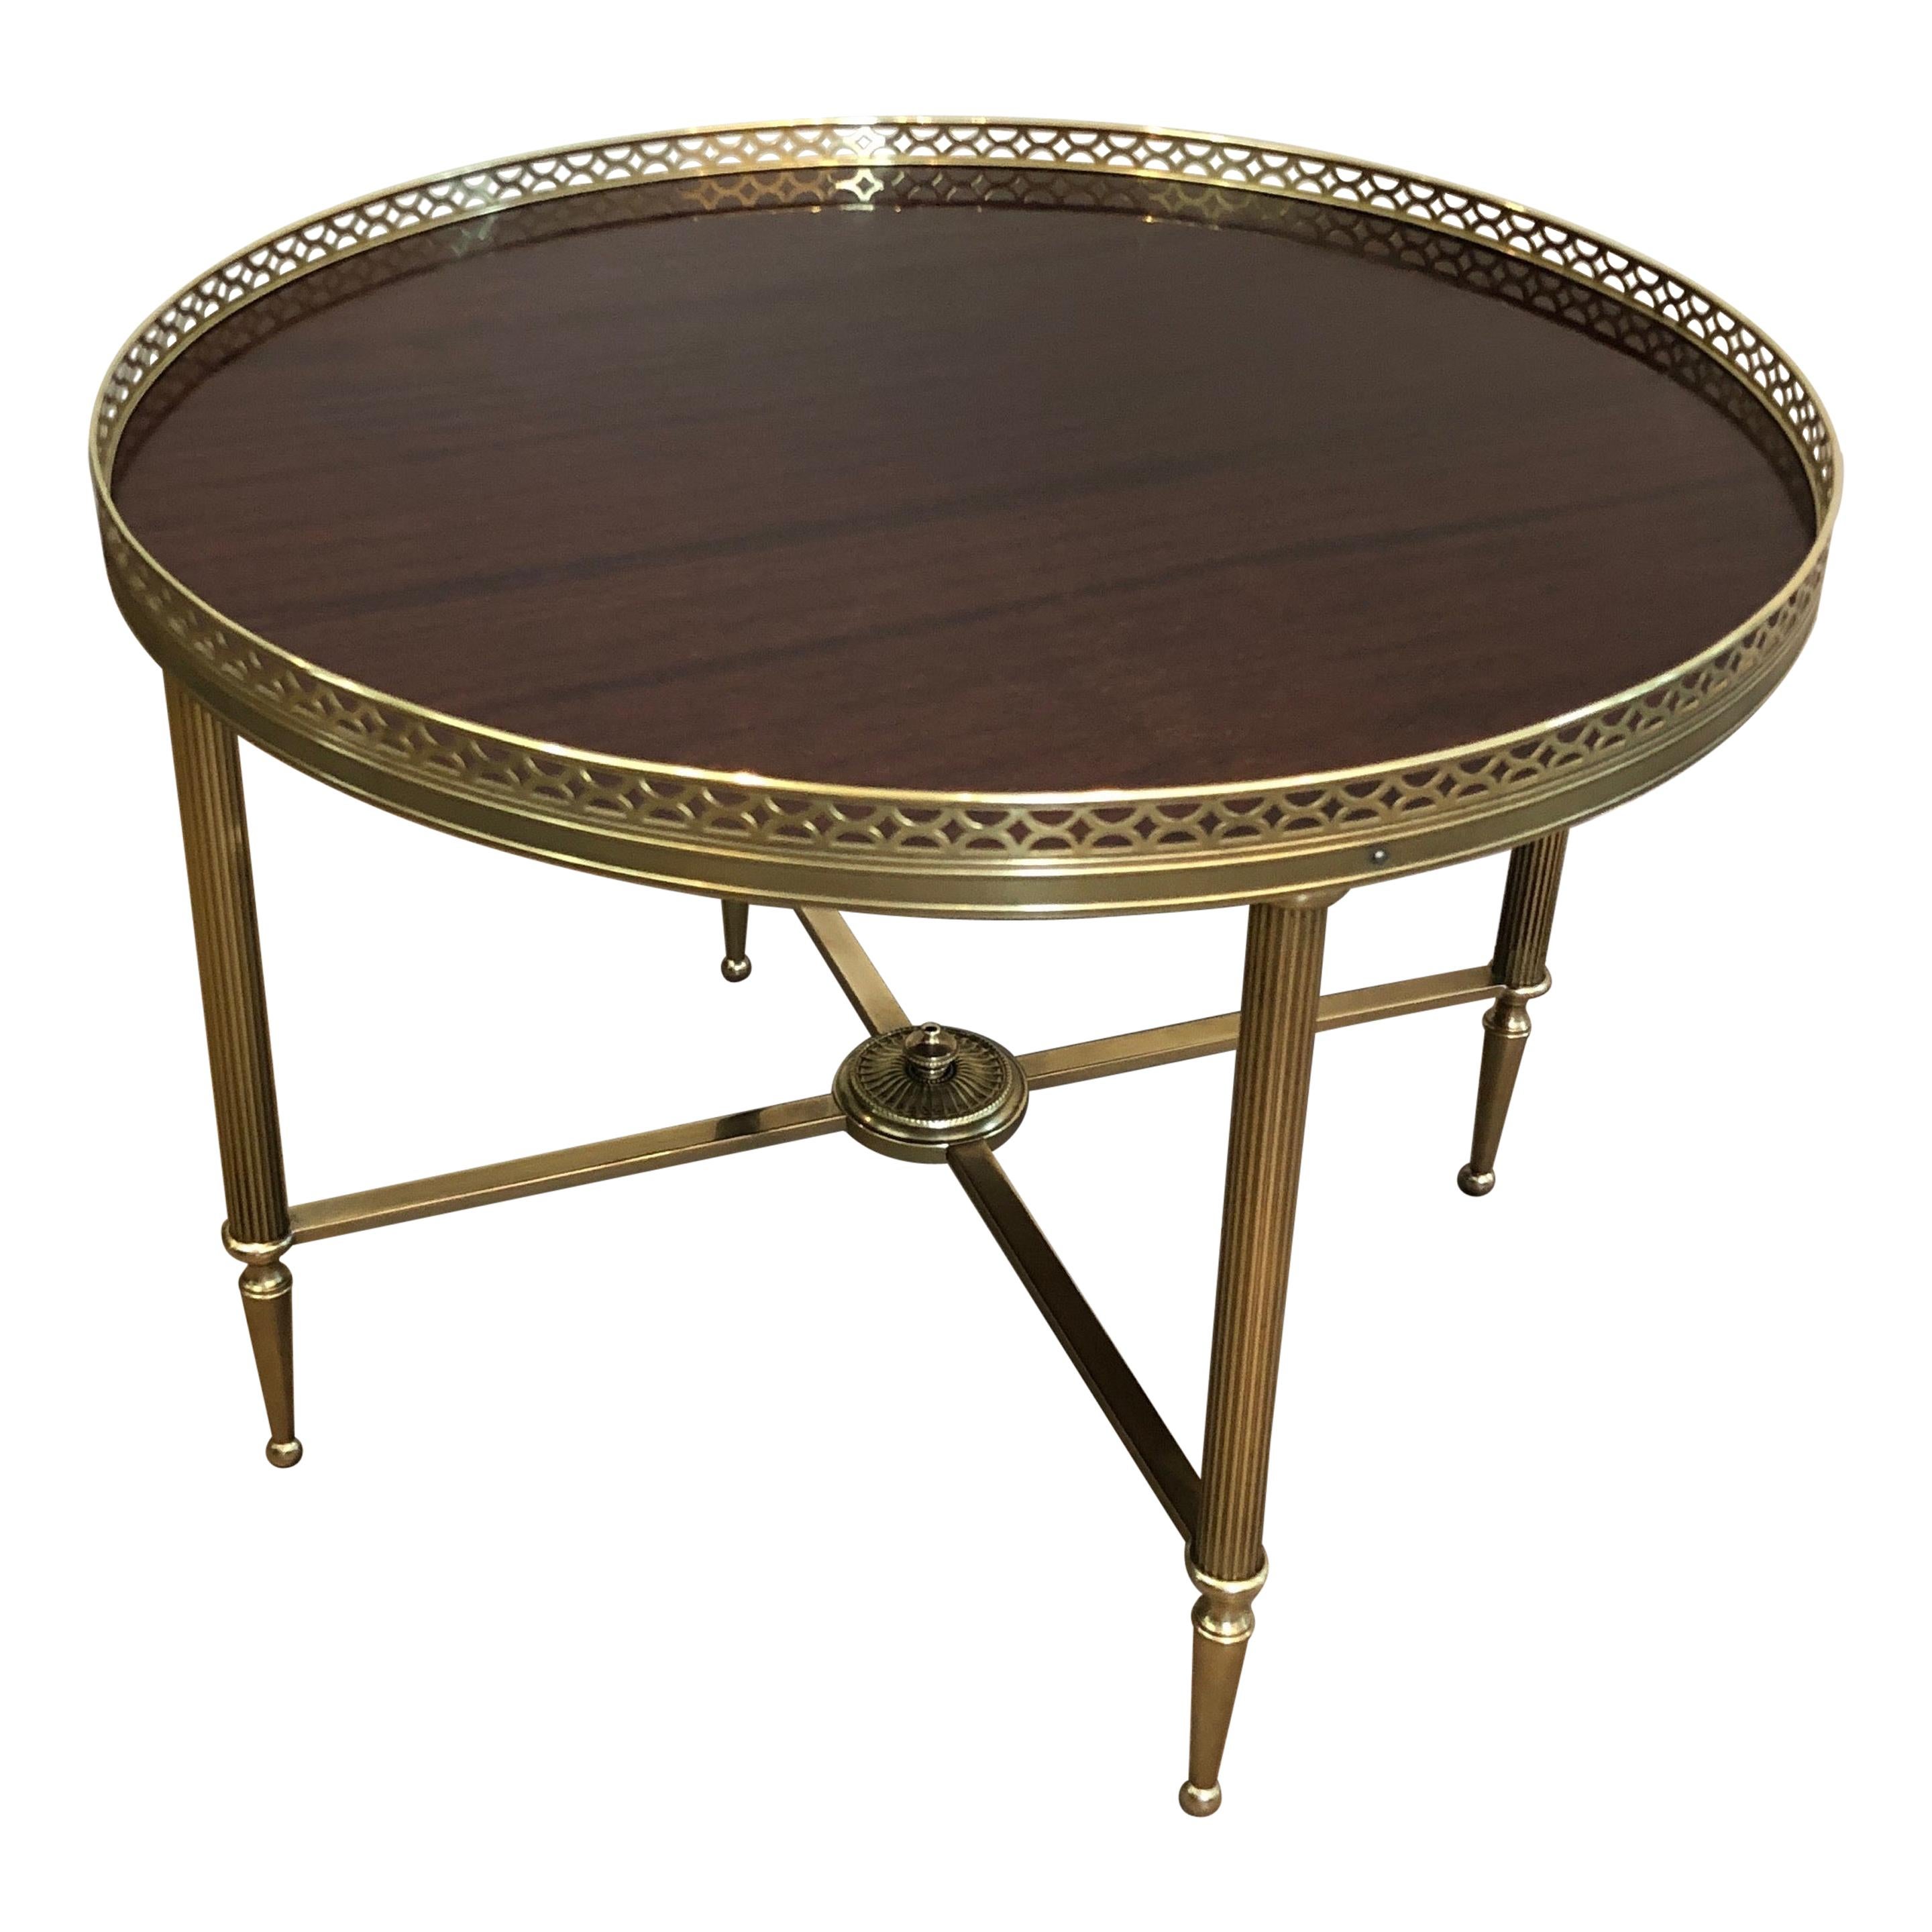 Maison Jansen, Neoclassical Brass Round Coffee Table with Mahogany Veneer Top F